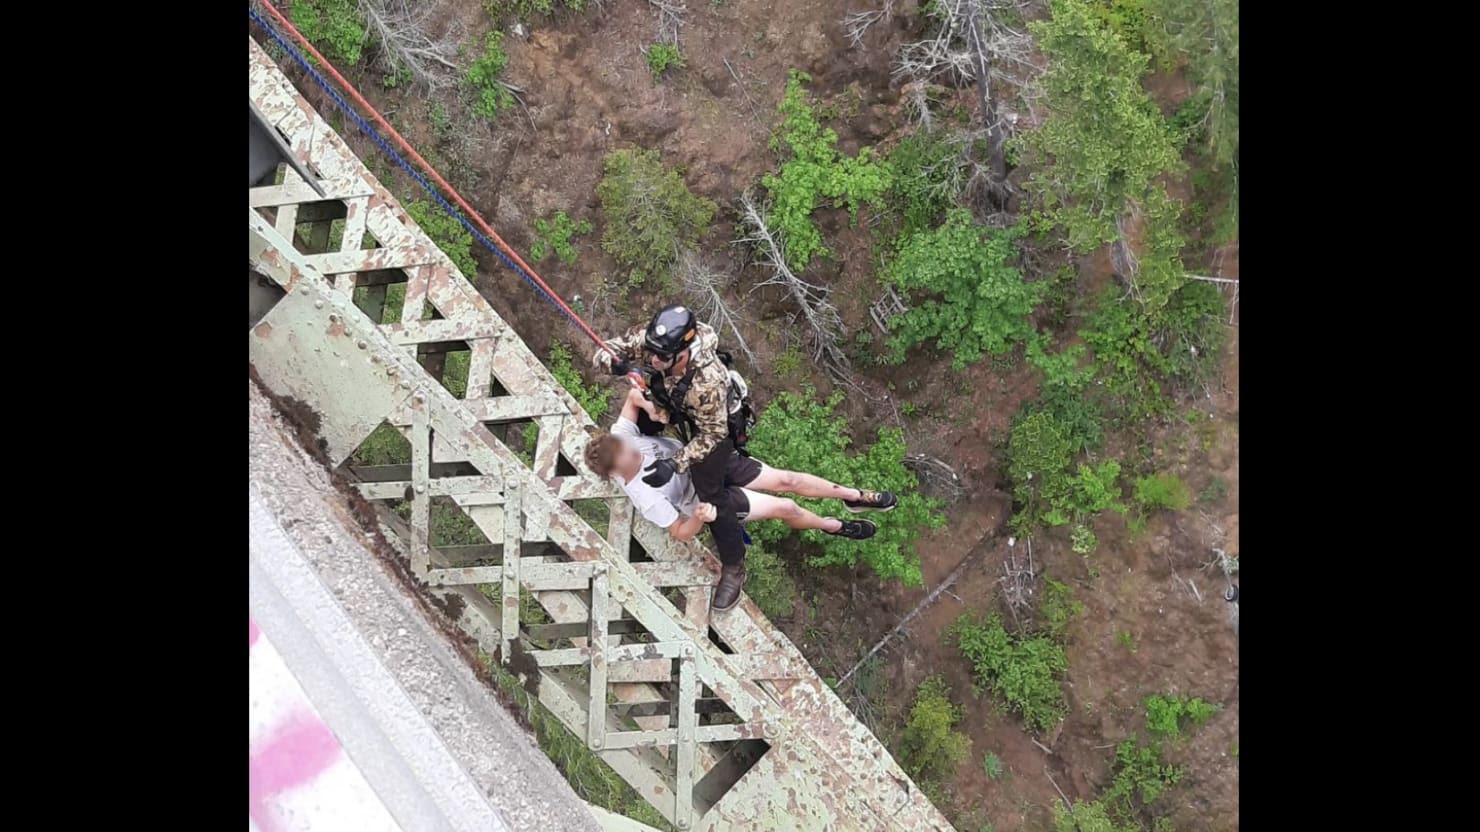 Teen Miraculously Survives 400-Foot Fall Down a Canyon